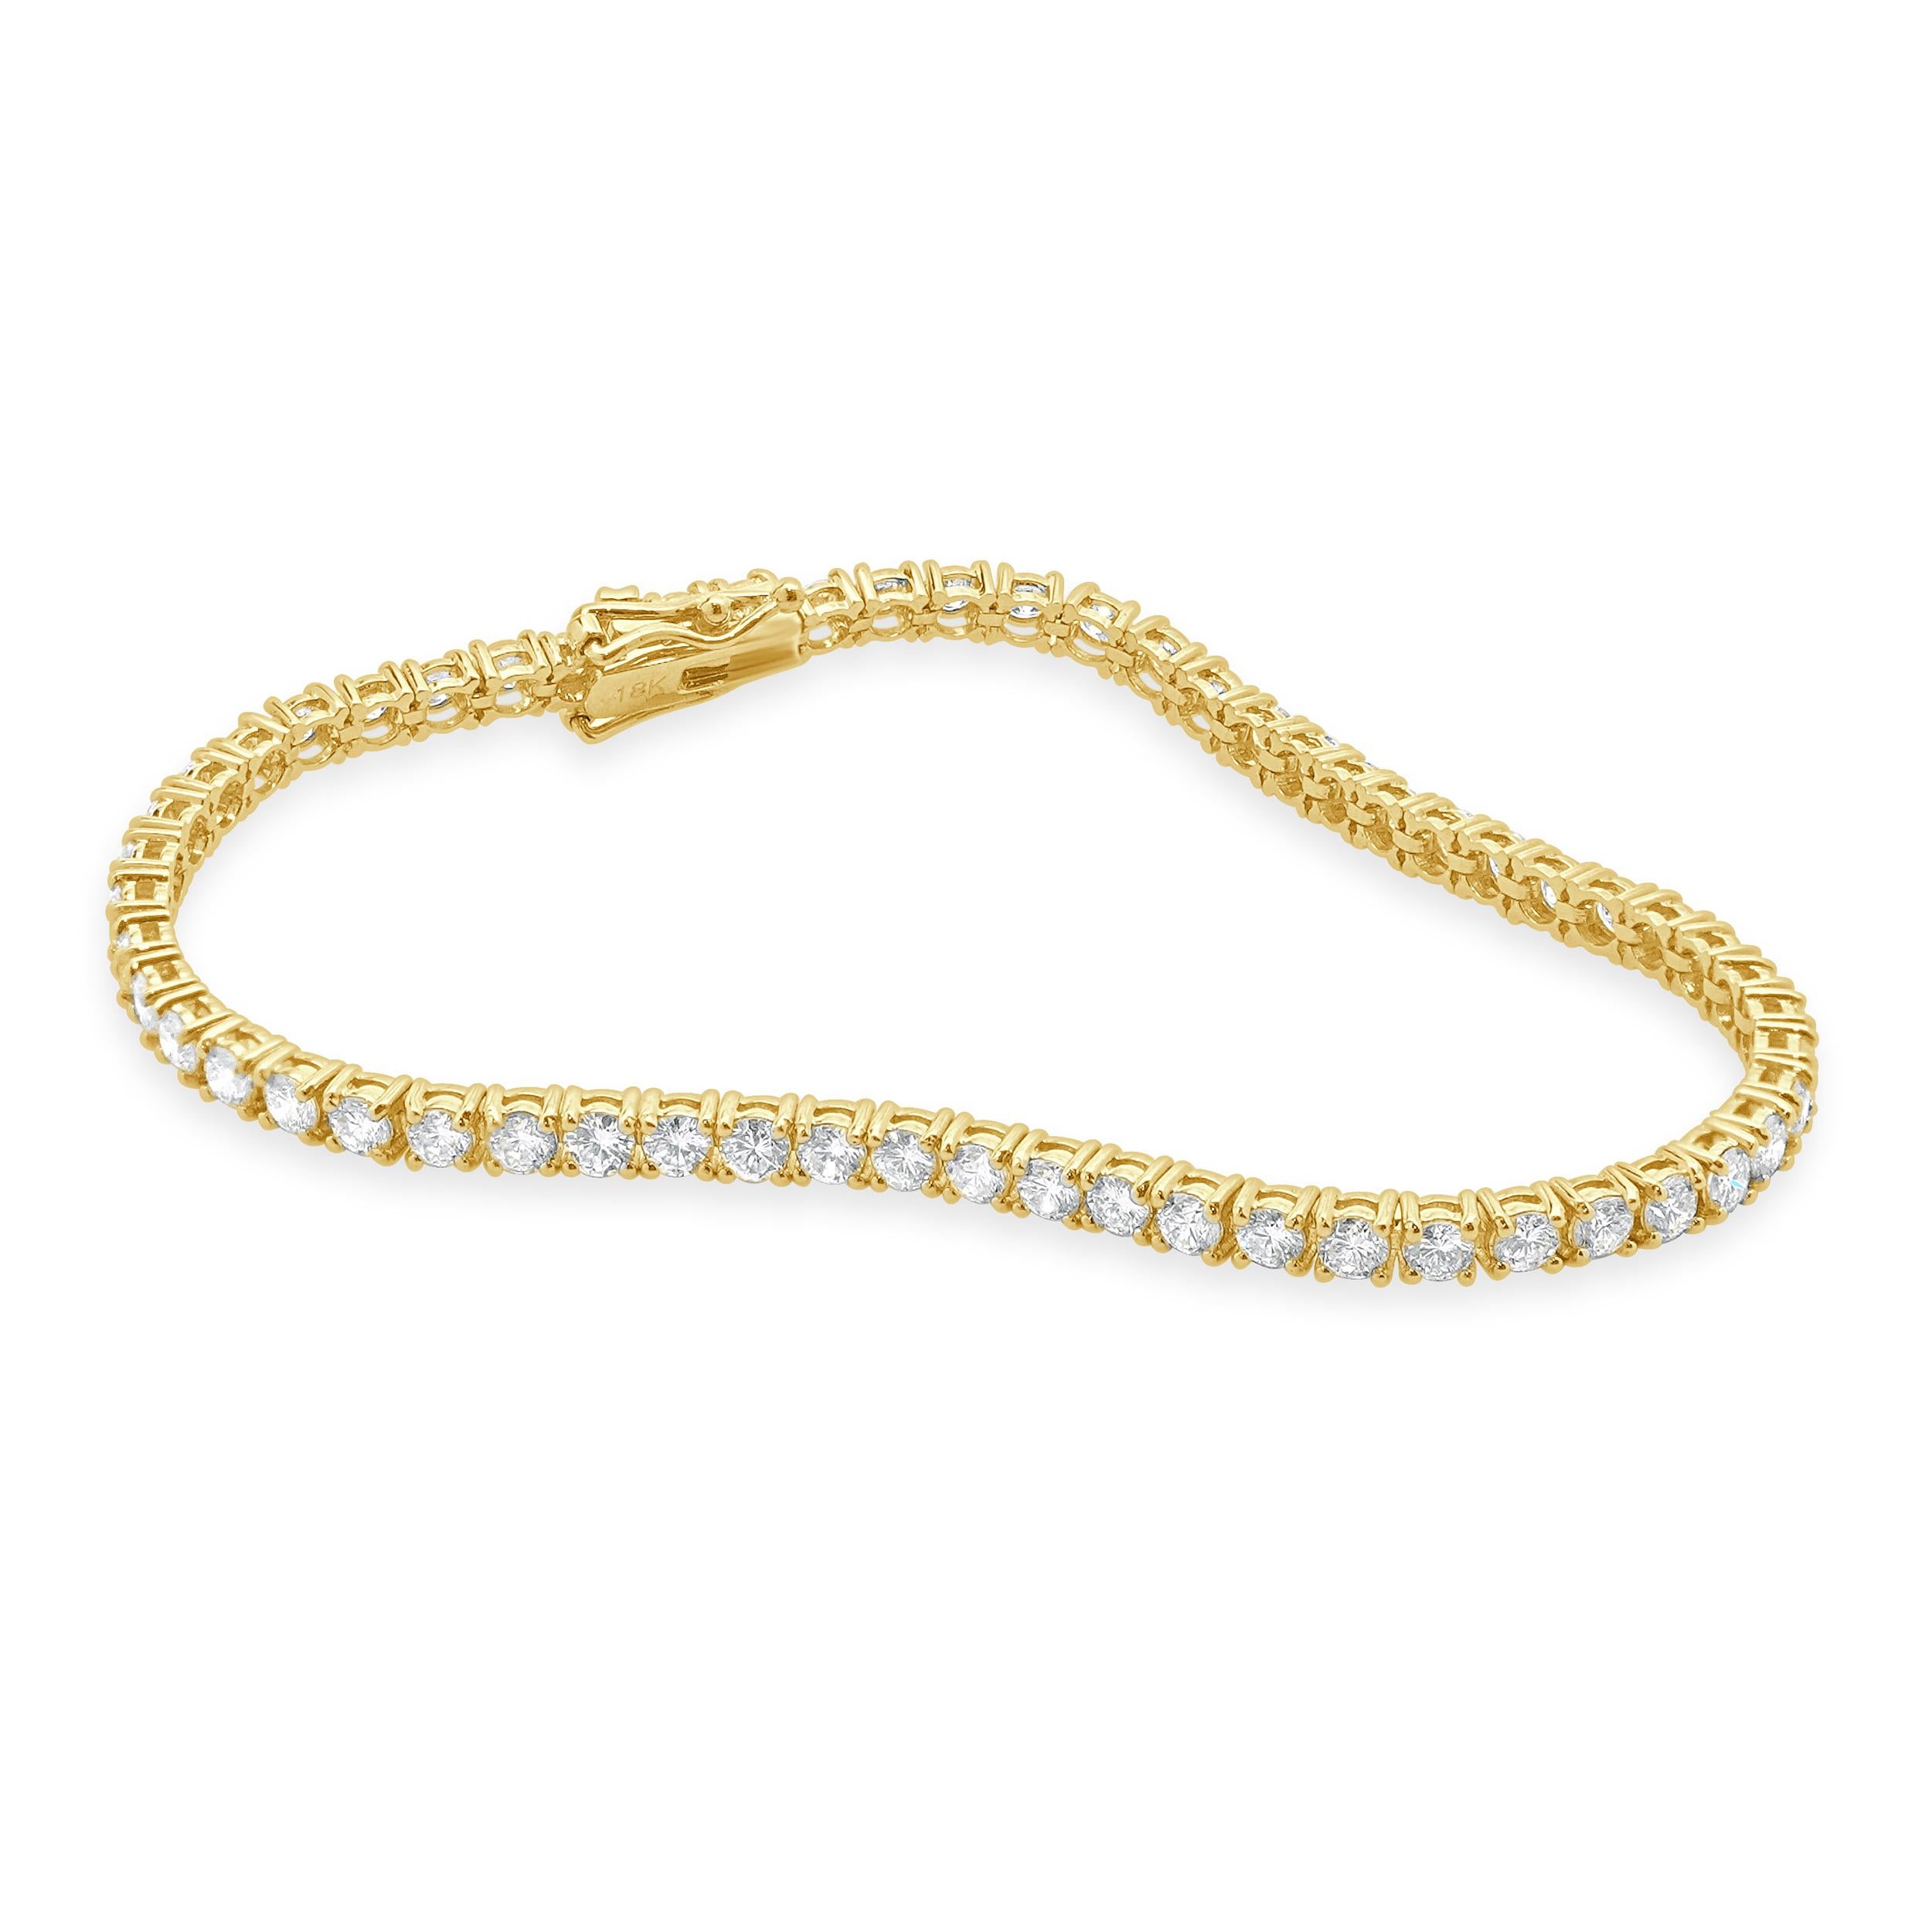 Designer: custom design
Material: 18K yellow Gold
Diamond: 57 round brilliant cut= 4.00cttw
Color: G
Clarity: VS
Dimensions: bracelet will fit up to a 7-inch wrist
Weight: 9.18 grams
